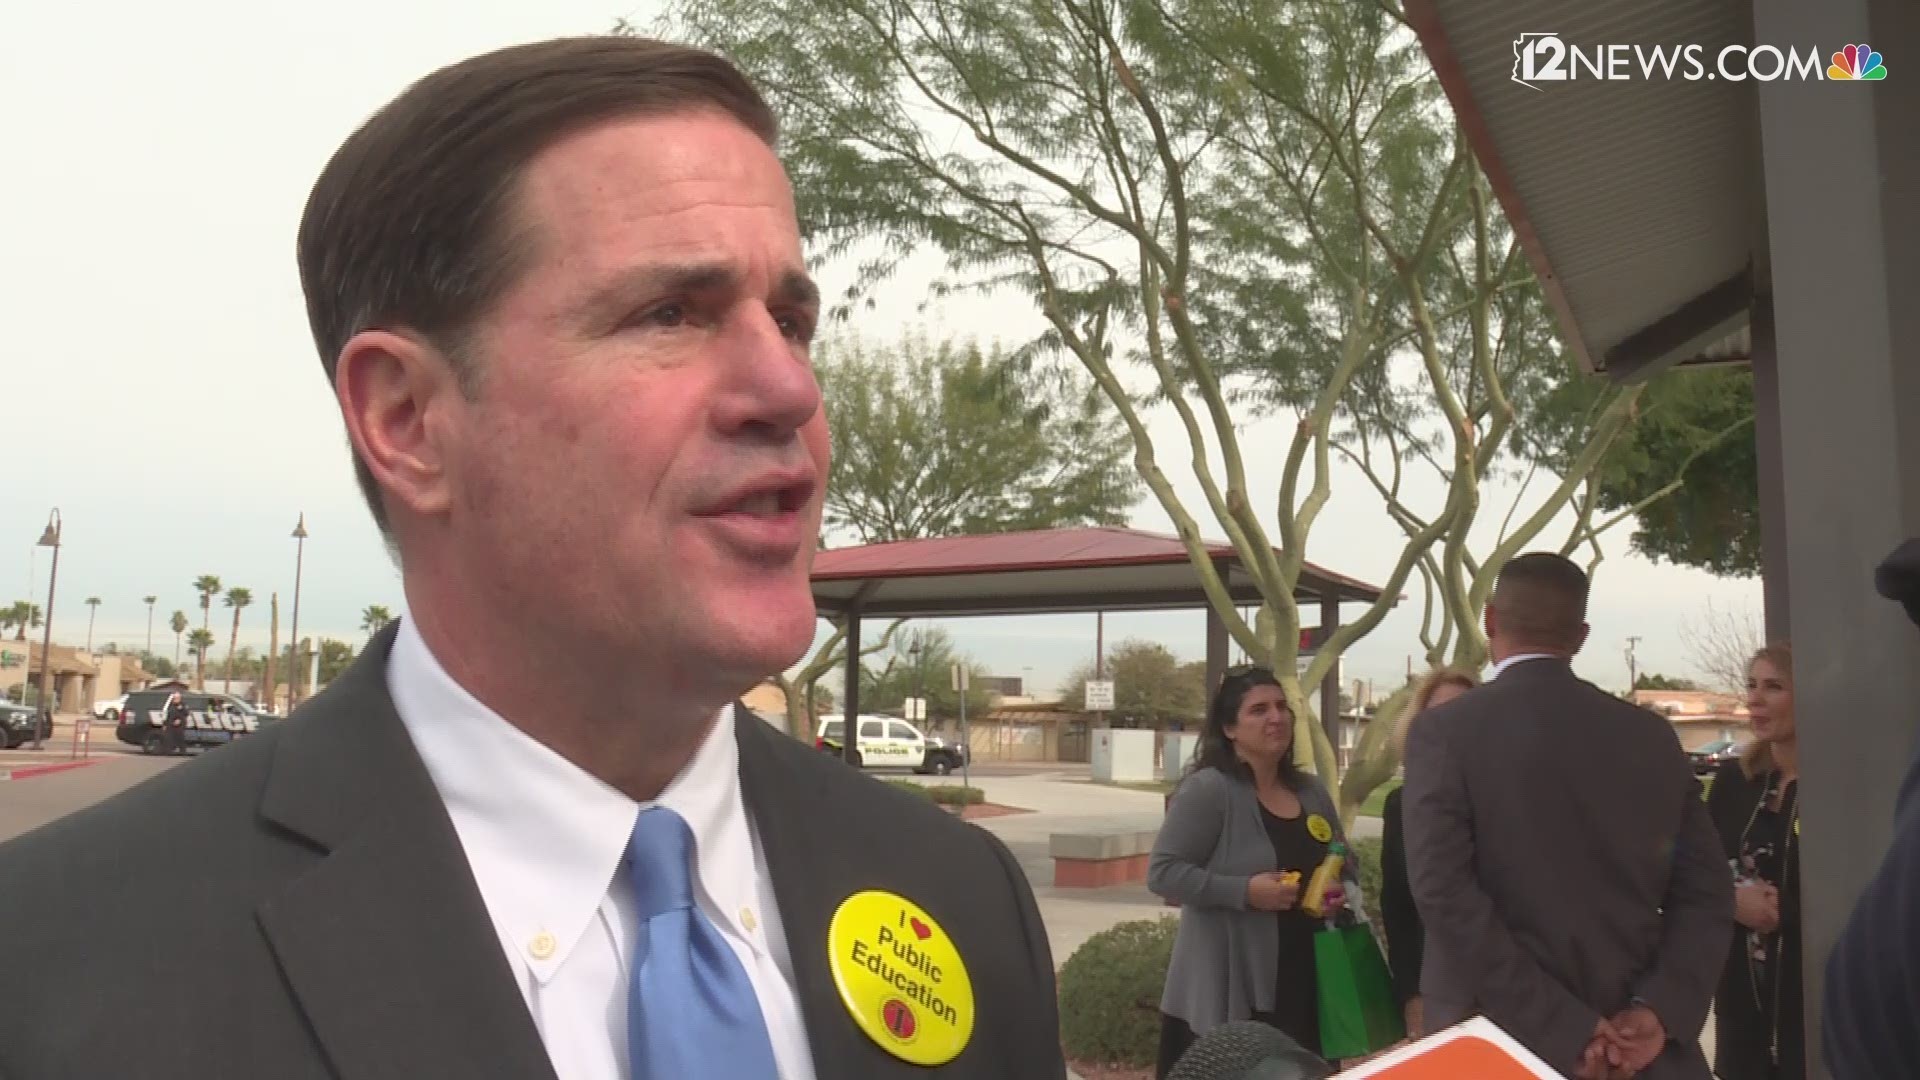 Governor Ducey commented today on the body cam video and investigation into a use of force incident from 2017 involving Glendale PD tasing a man 11 times. Ducey said, "the investigation was white washed."